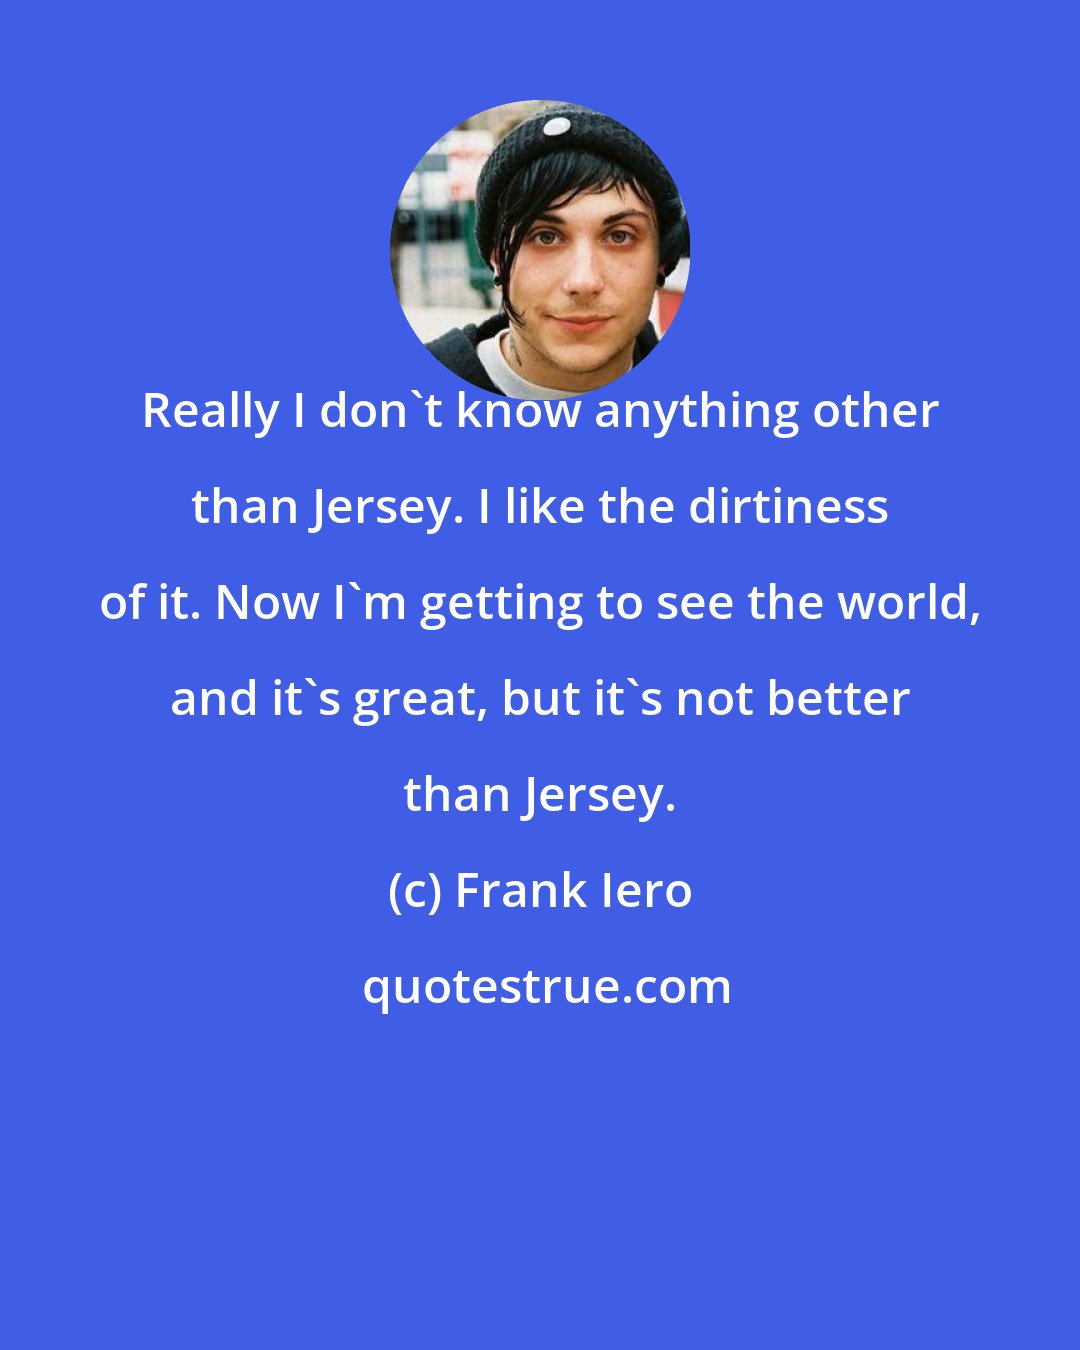 Frank Iero: Really I don't know anything other than Jersey. I like the dirtiness of it. Now I'm getting to see the world, and it's great, but it's not better than Jersey.